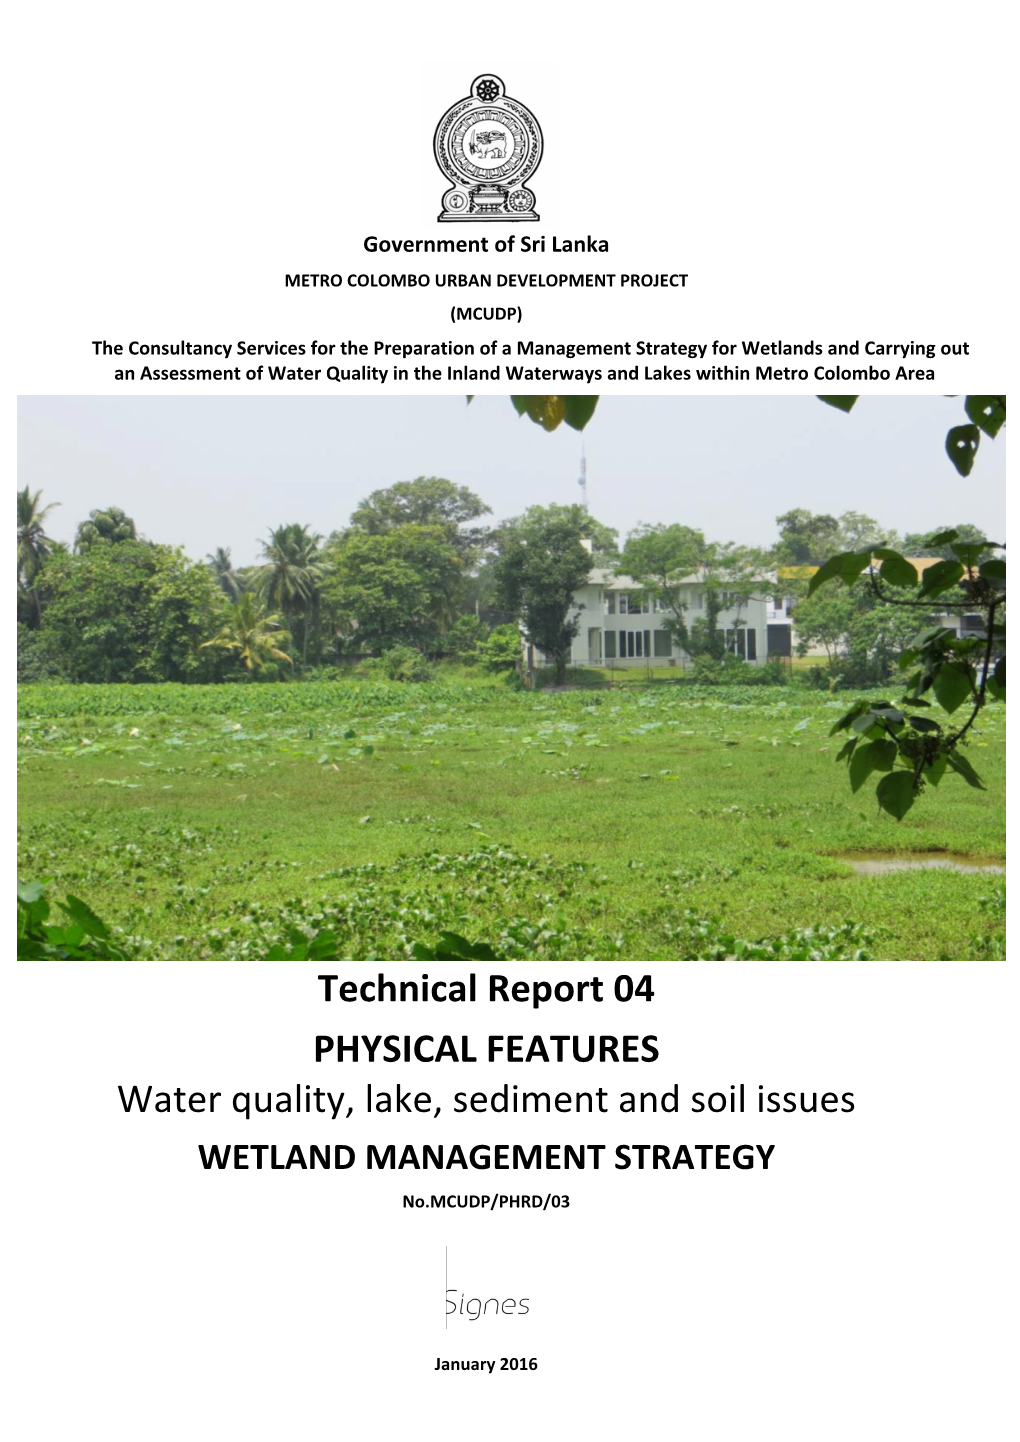 PHYSICAL FEATURES Water Quality, Lake, Sediment and Soil Issues WETLAND MANAGEMENT STRATEGY No.MCUDP/PHRD/03